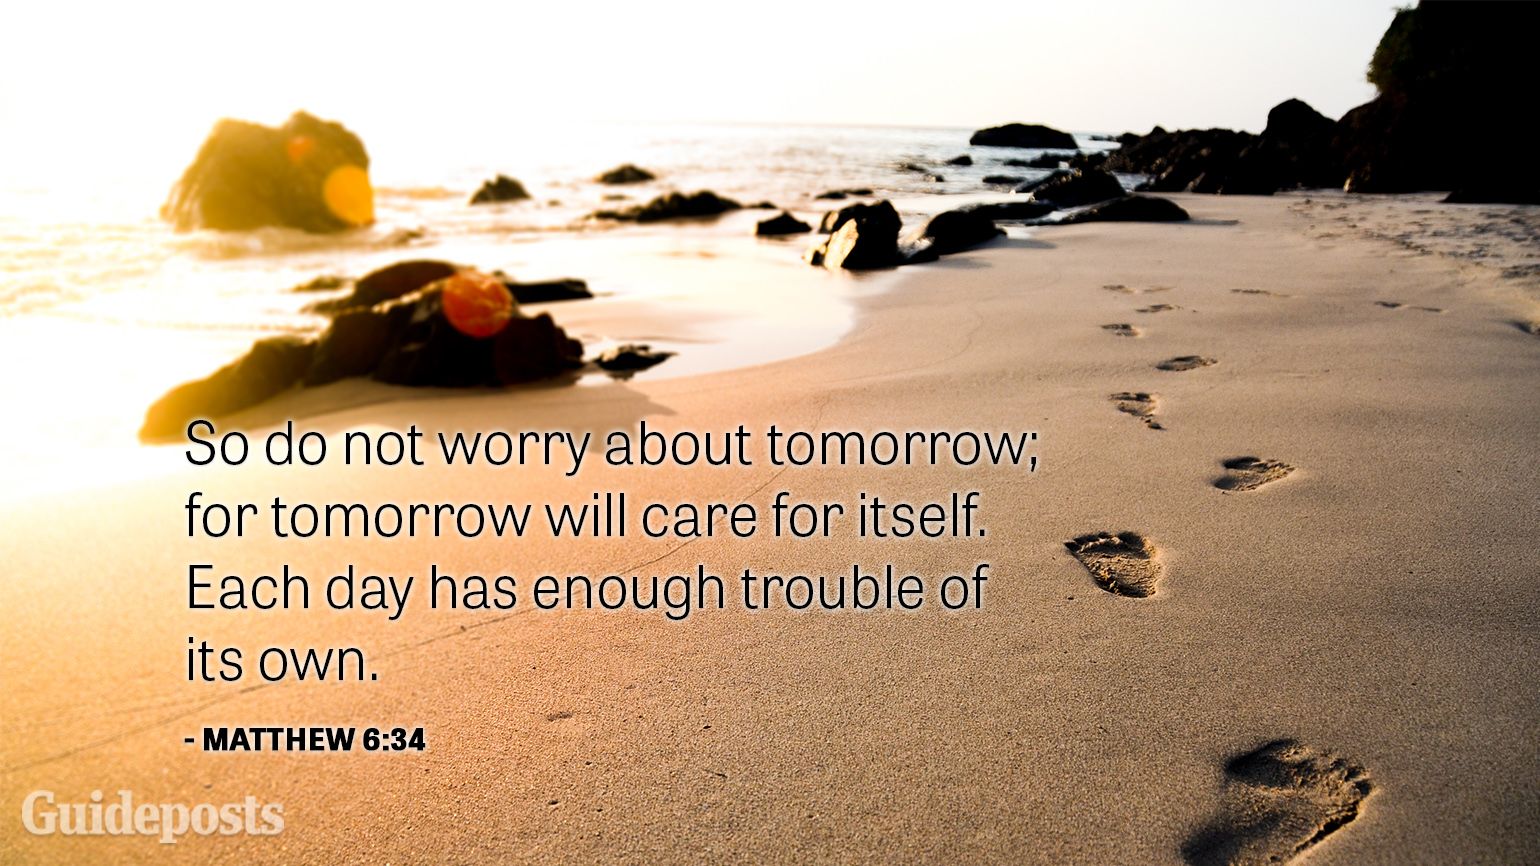 So do not worry about tomorrow; for tomorrow will care for itself. Each day has enough trouble of its own.